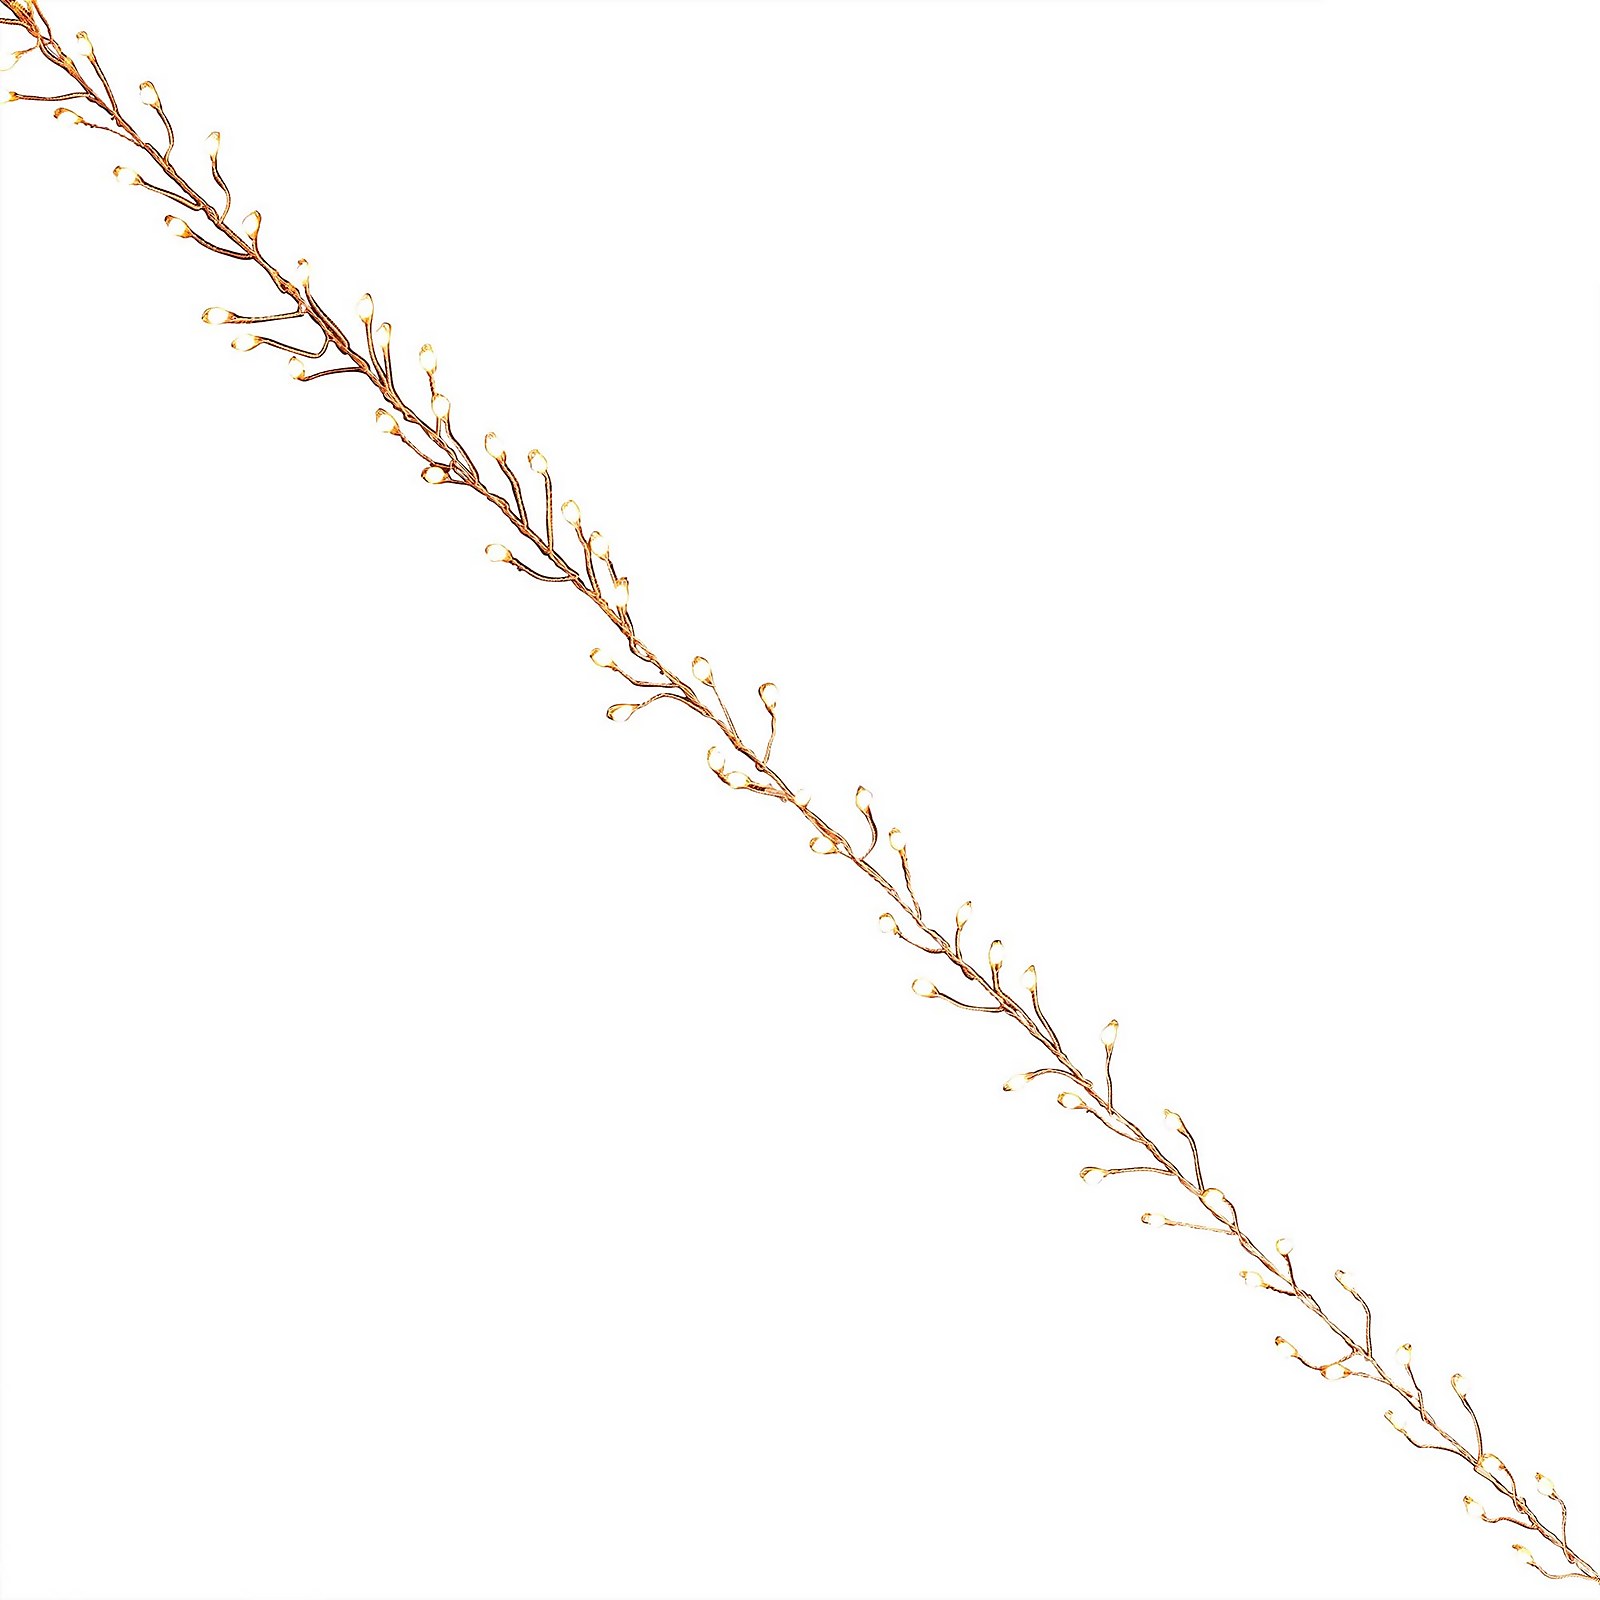 Photo of 240 Large Led Rose Gold Copper Wire Garland Christmas Lights - Warm White